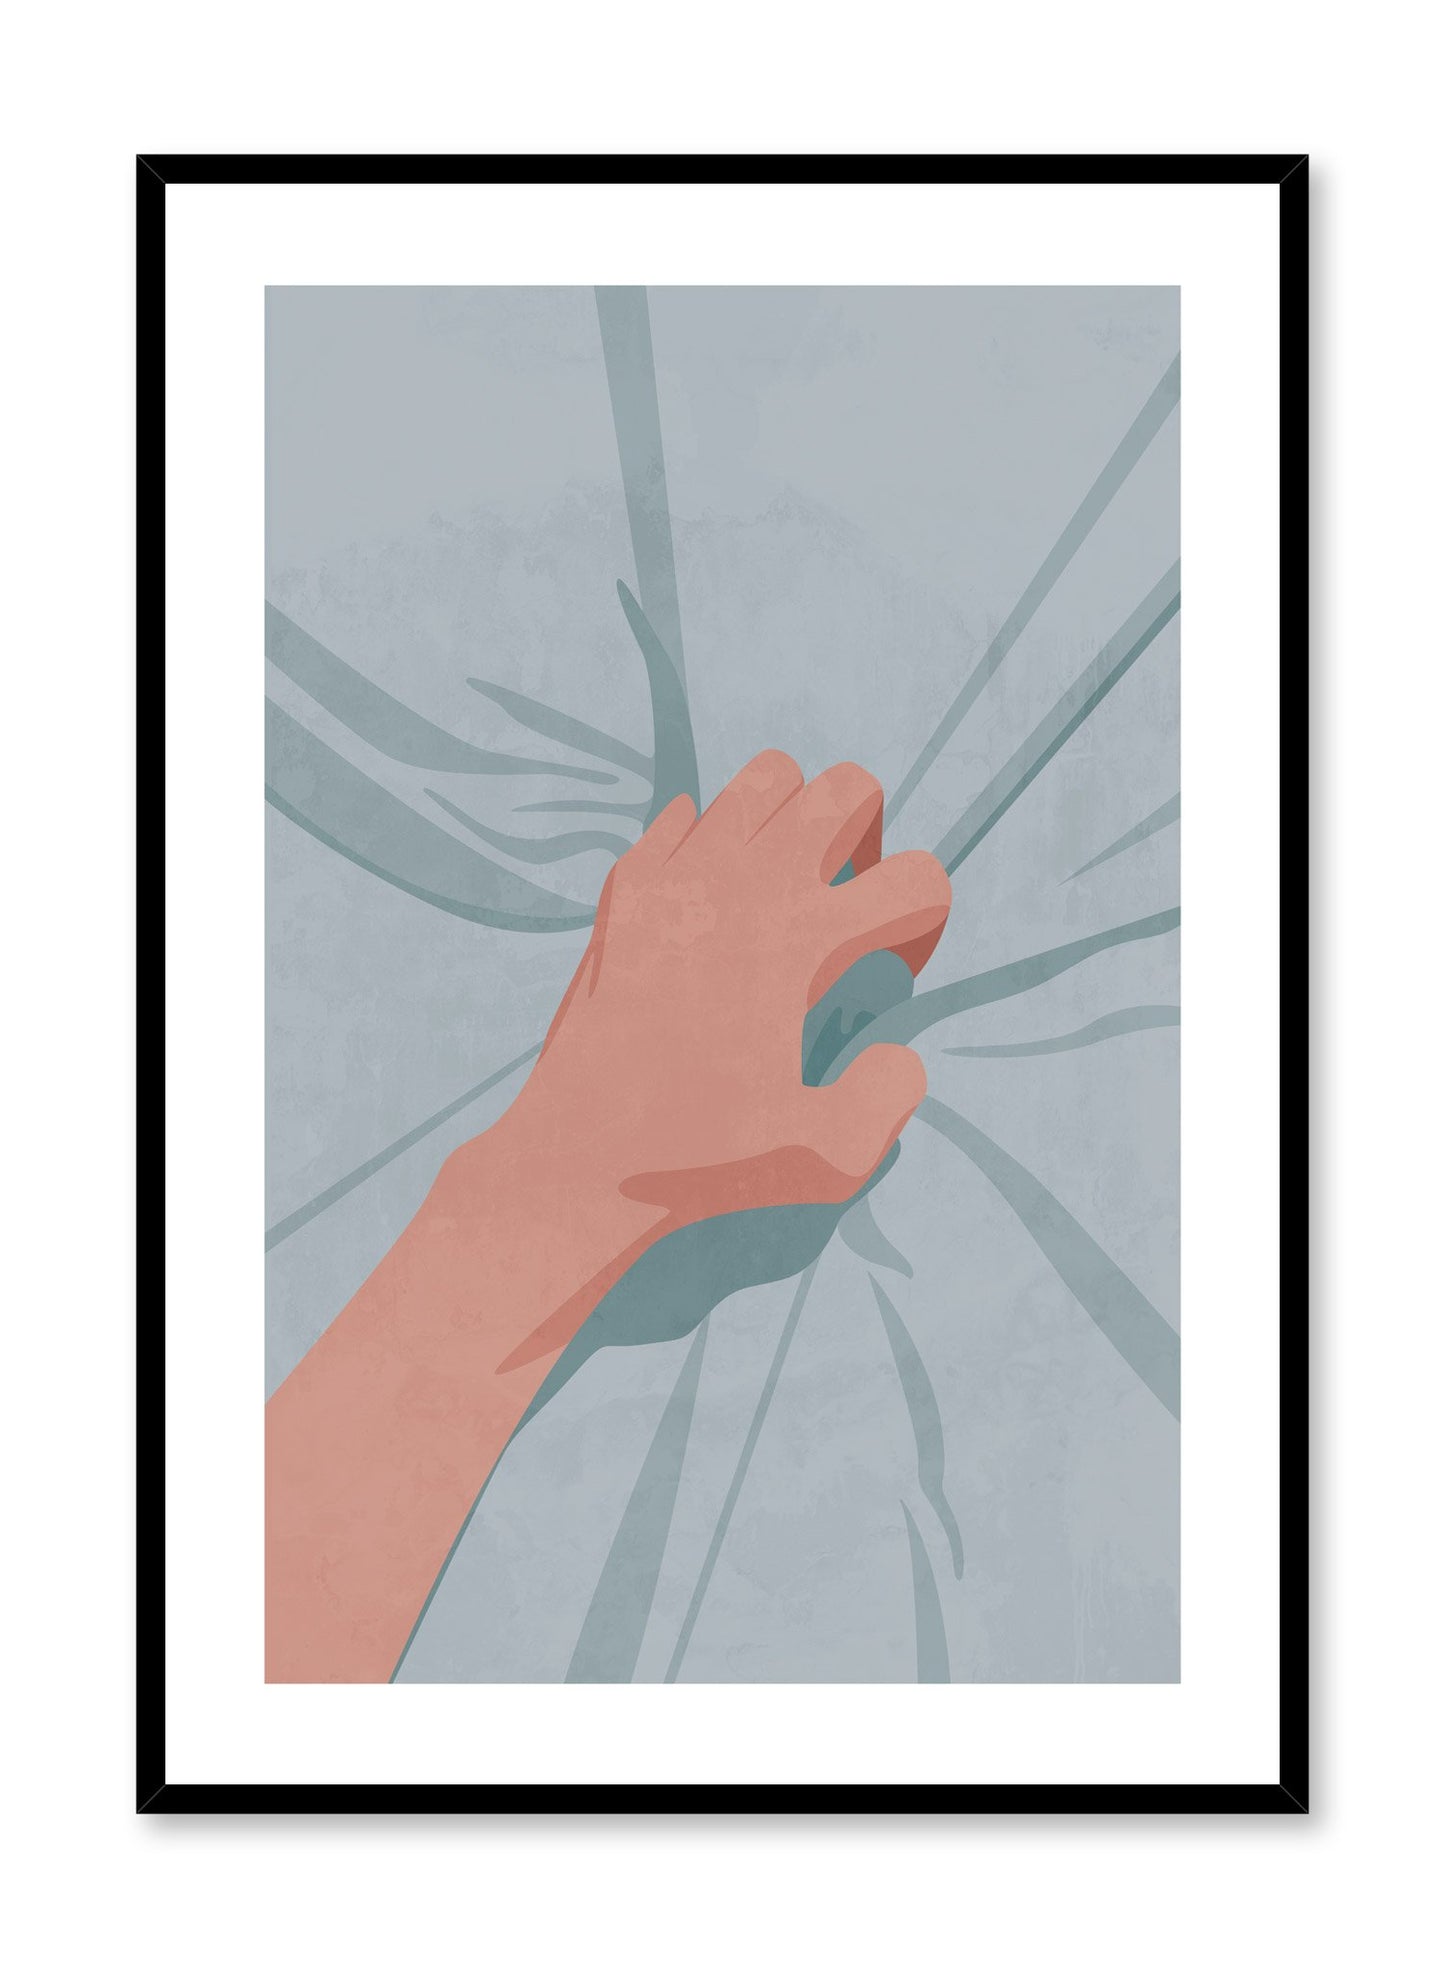 "Spasm" is a minimalist and sensual illustration poster by Opposite Wall of a hand grabbing blue sheets in a moment of orgasmic pleasure. 